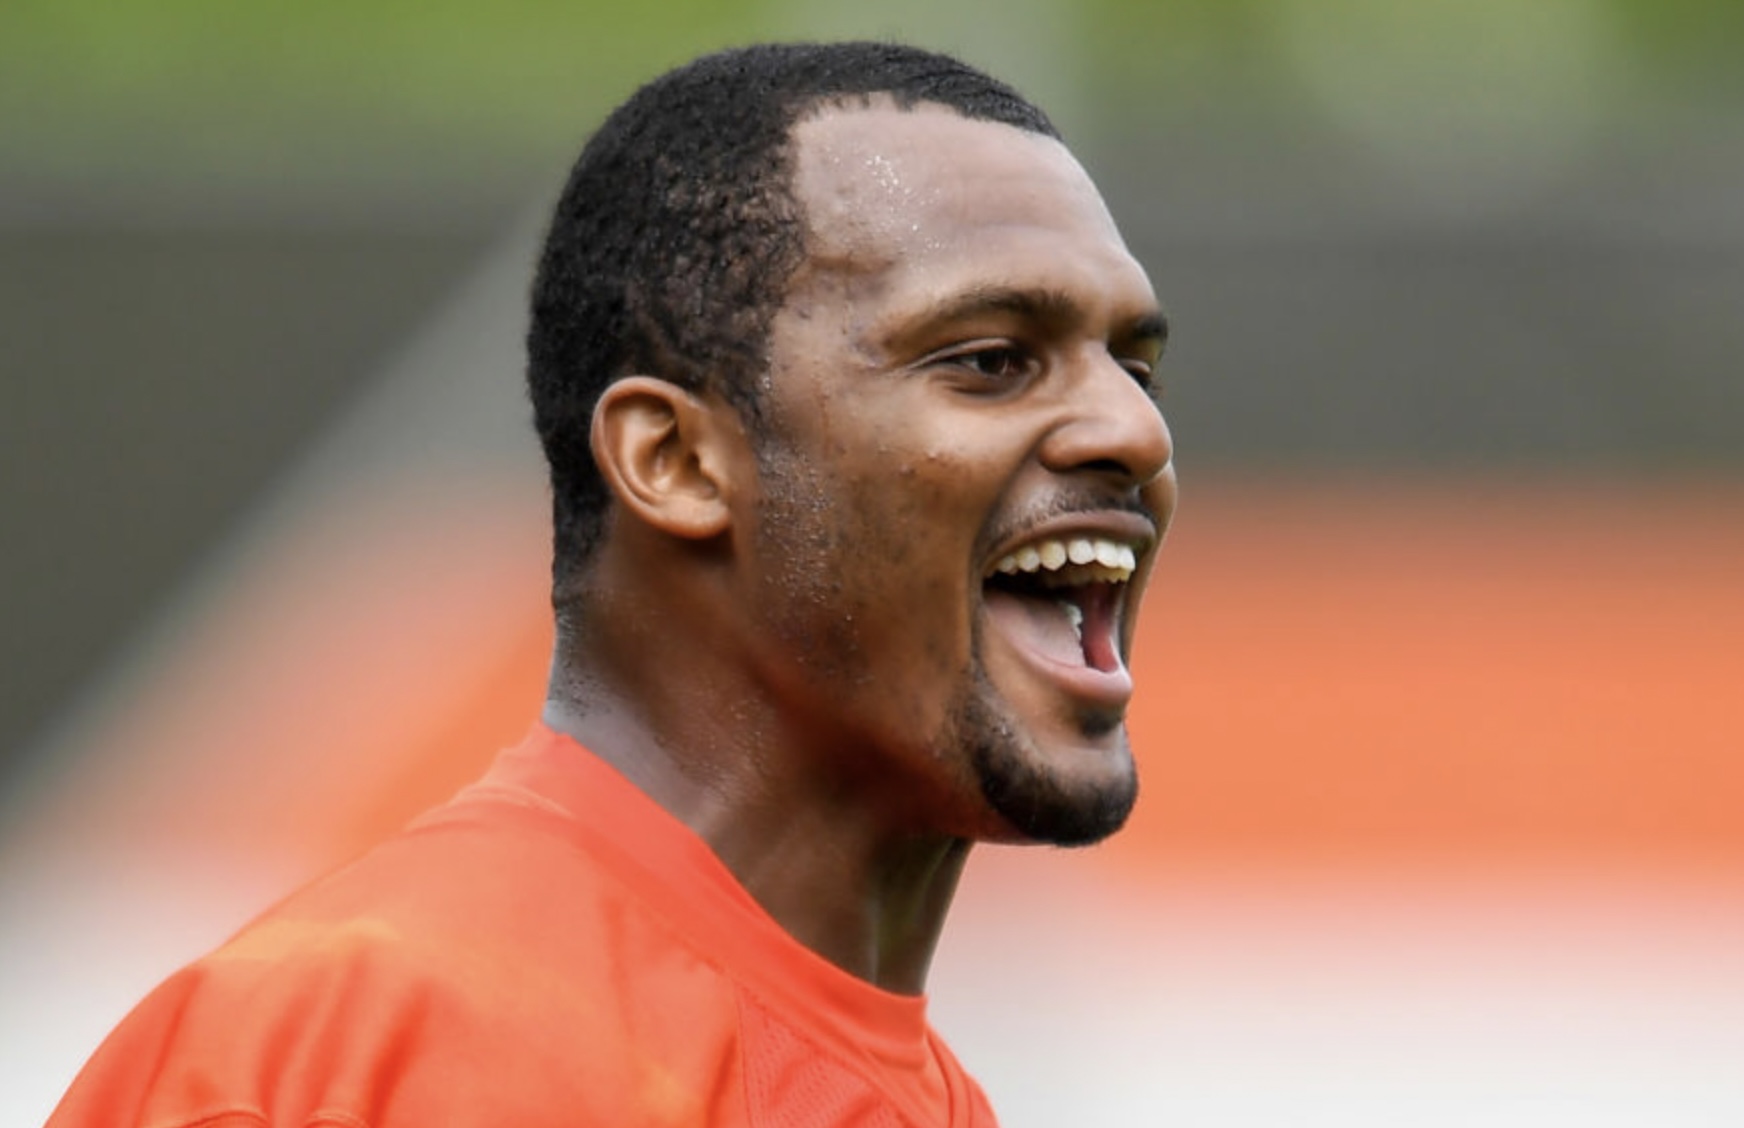 Deshaun Watson Releases Text Messages From Massage Therapist Saying She Gives Best Oral